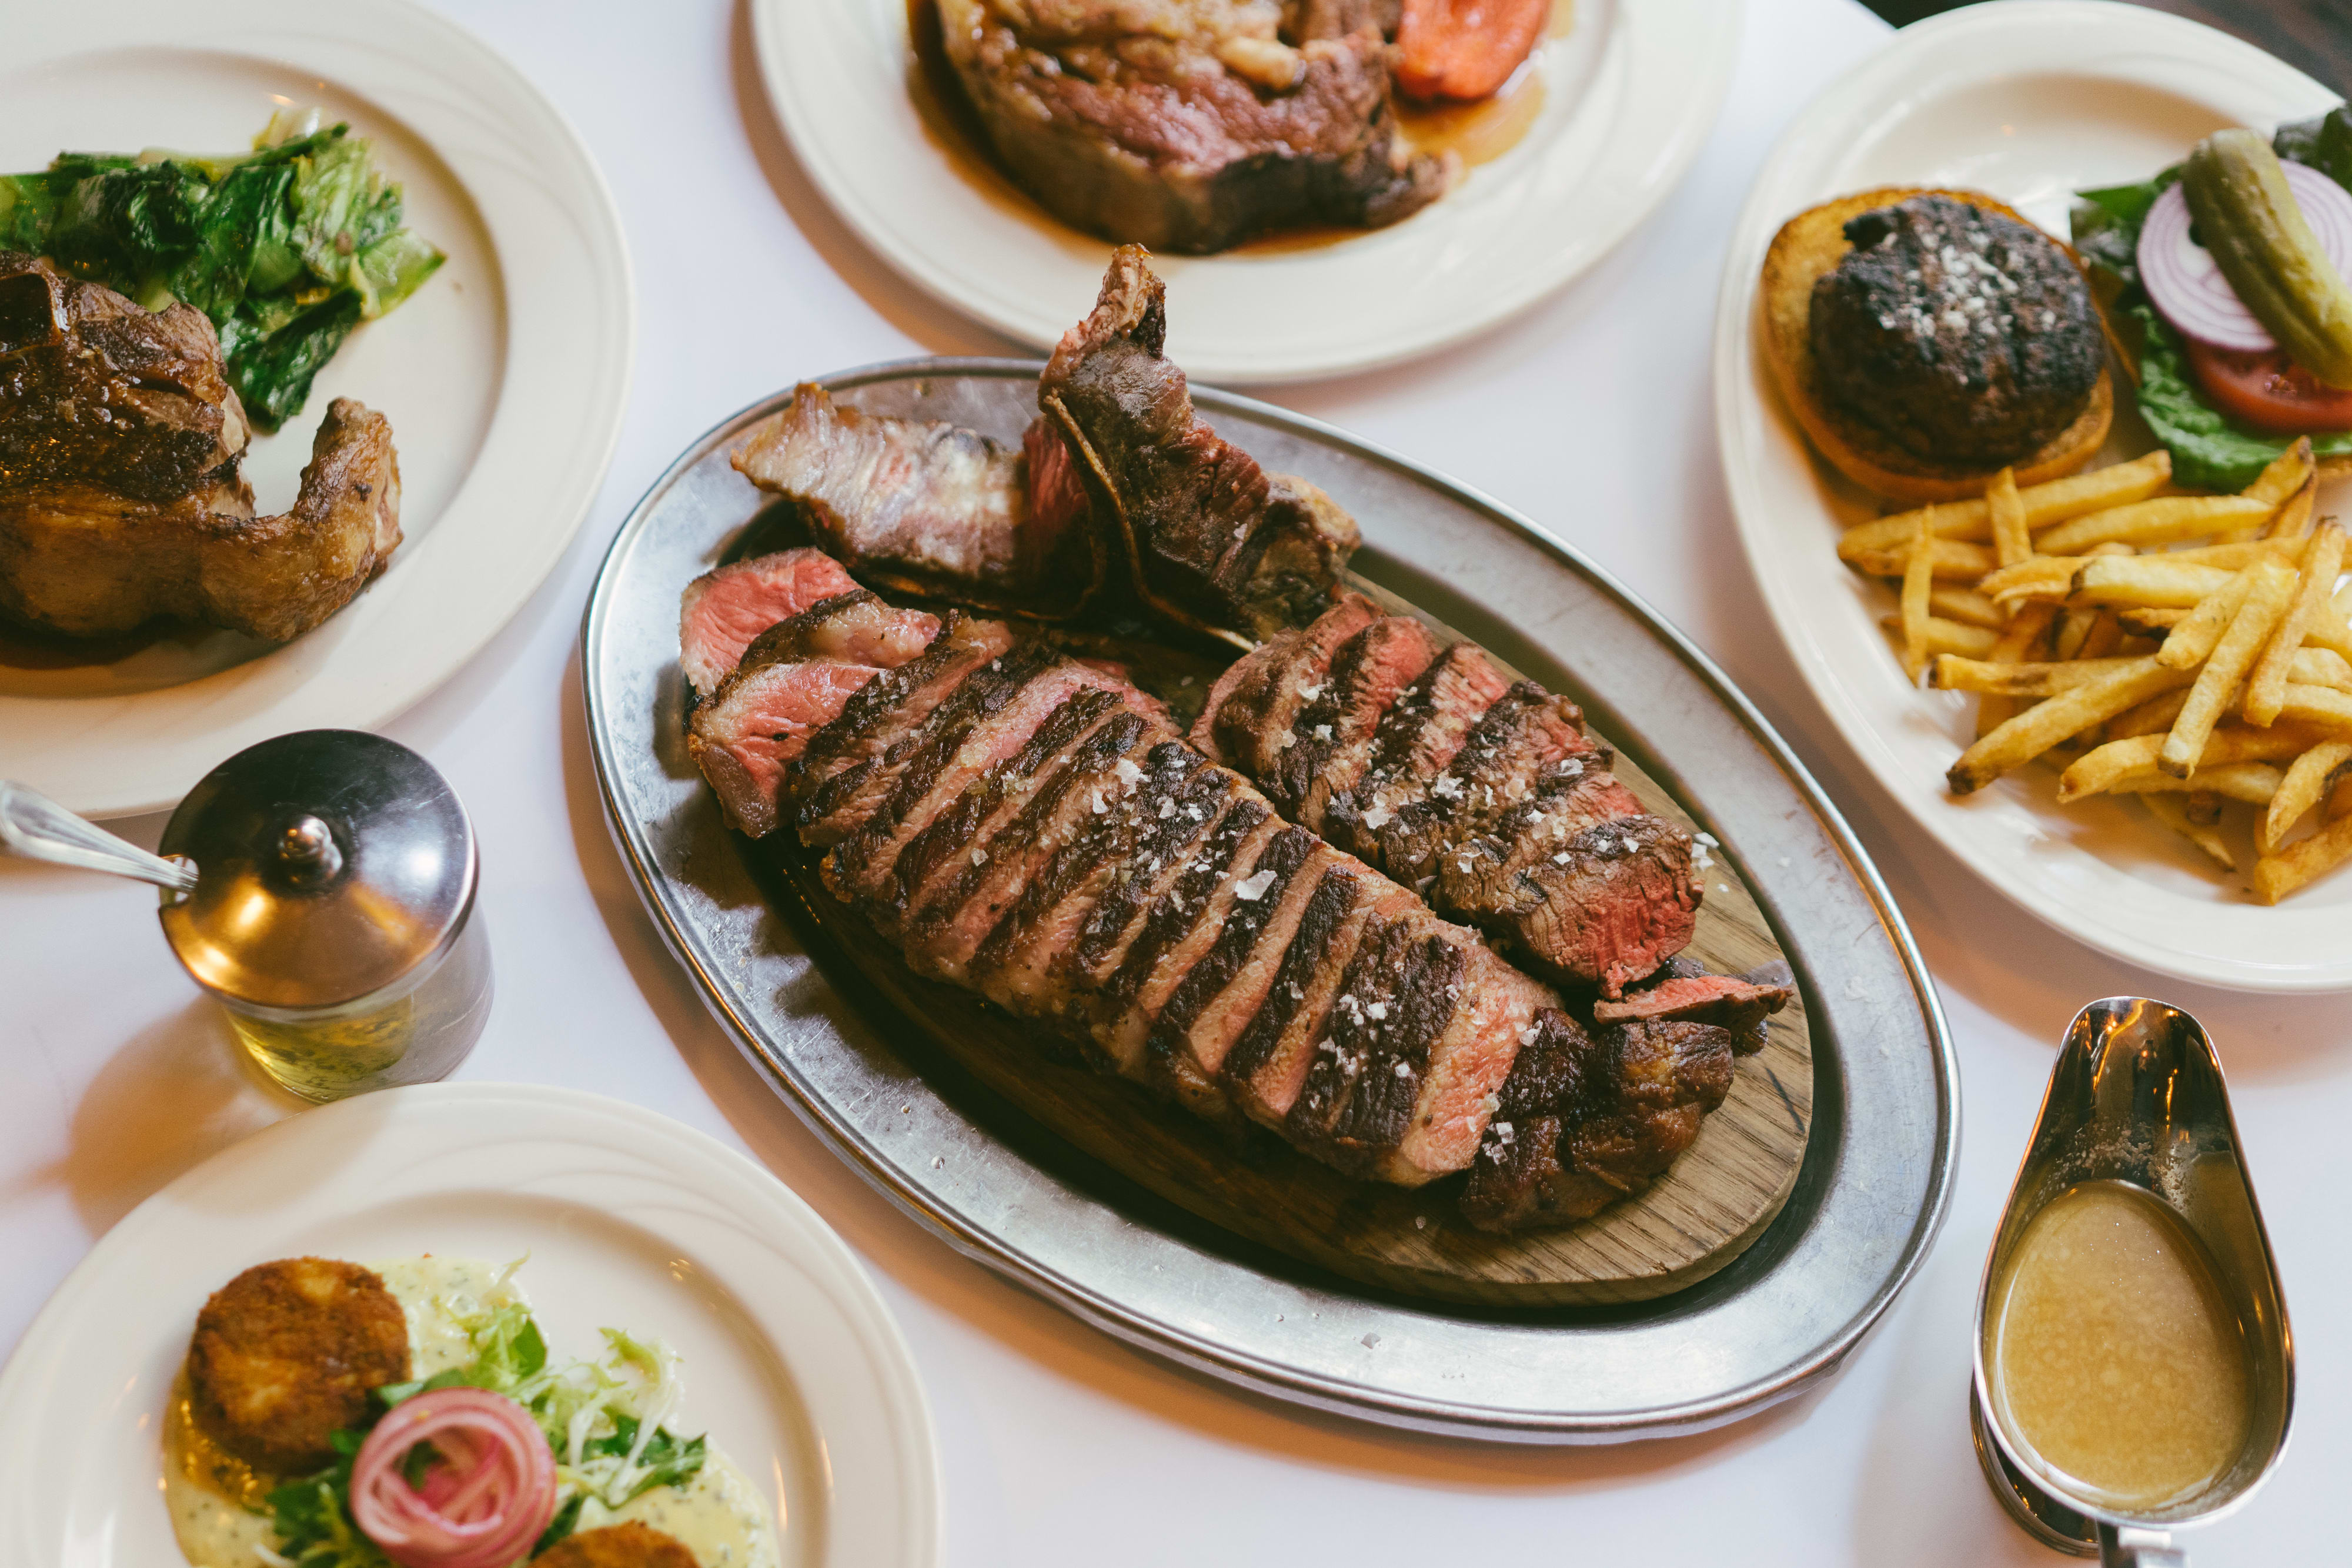 Meet the Meat Steakhouse Restaurant in Queens, NY